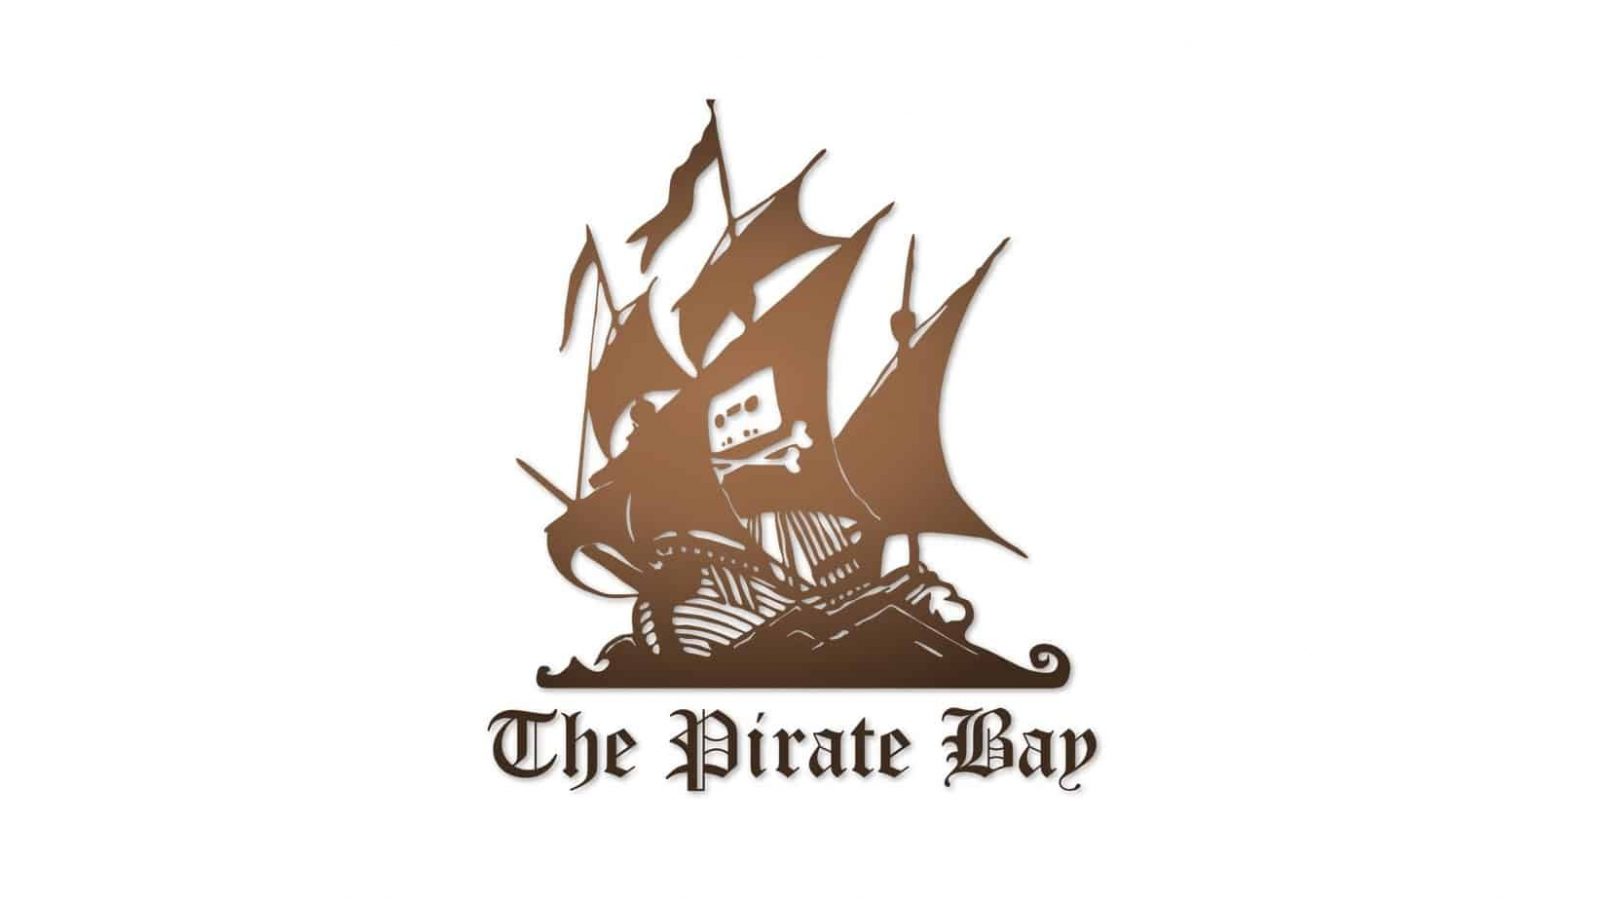 How to Download Torrent from The Pirate Bay – Easy Guide